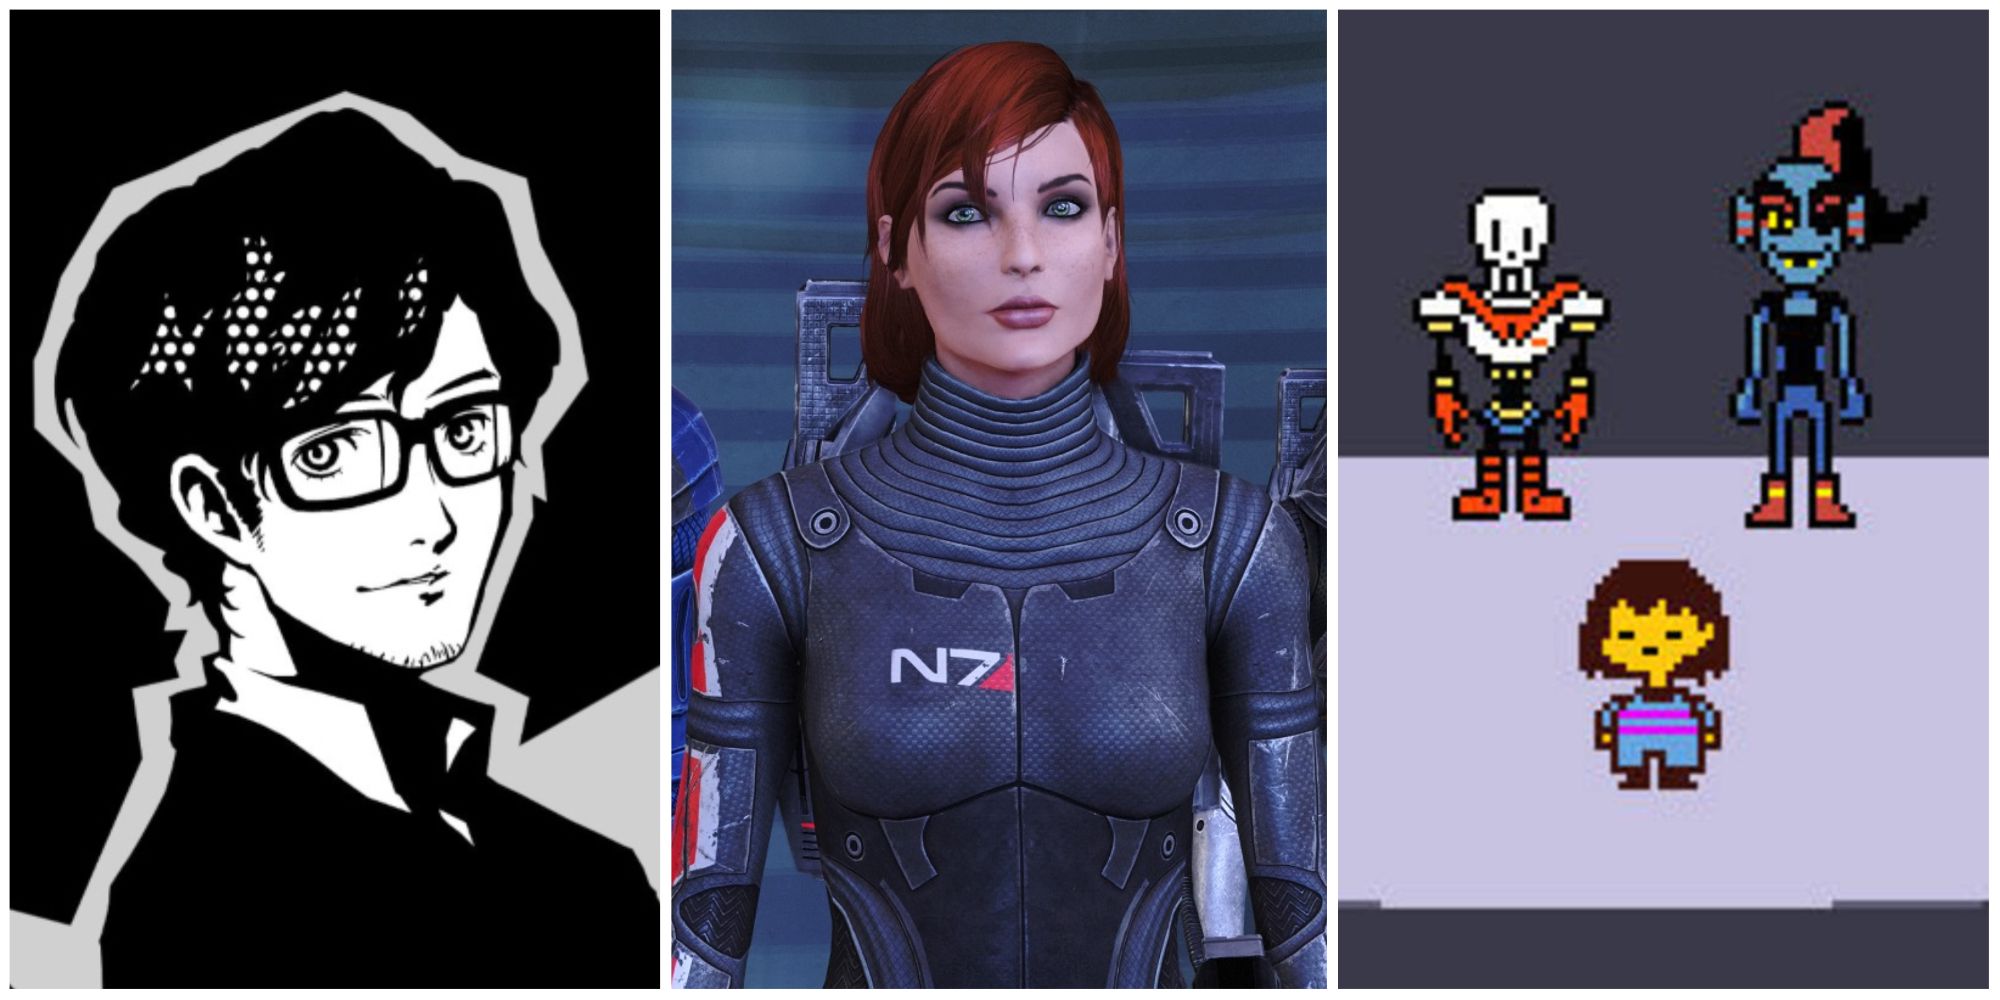 Persona 5 Royal, Mass Effect, and Undertale